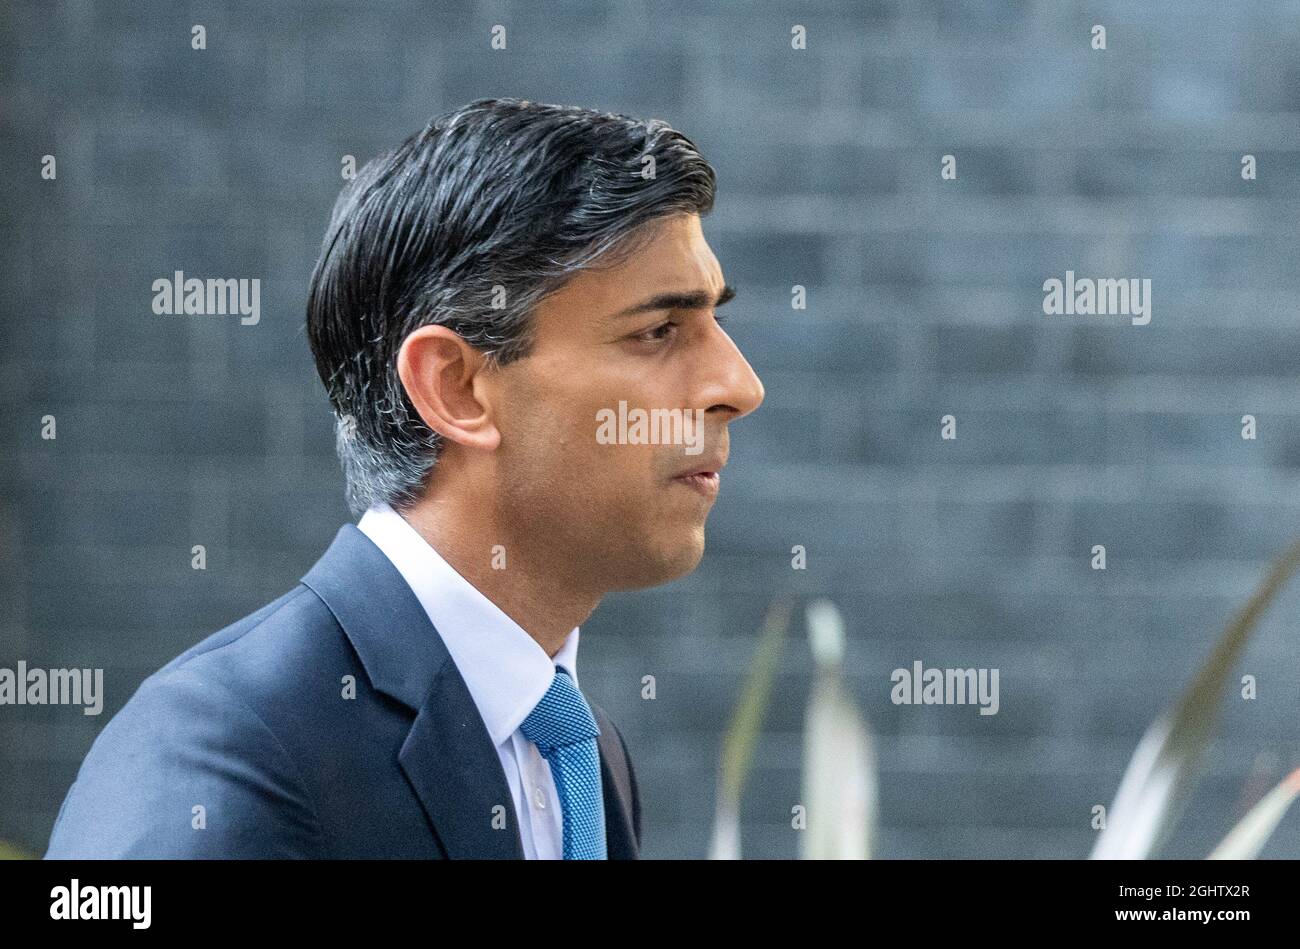 London, UK. 7th Sep, 2021. Boris Johnson, MP Prime Minister, Sajid Javid, Health Secretary and Rishi Sunak, Chancellor of the Exchequer walk from 10 Downing Street to the press conference on the National Insurance increase. Credit: Ian Davidson/Alamy Live News Stock Photo